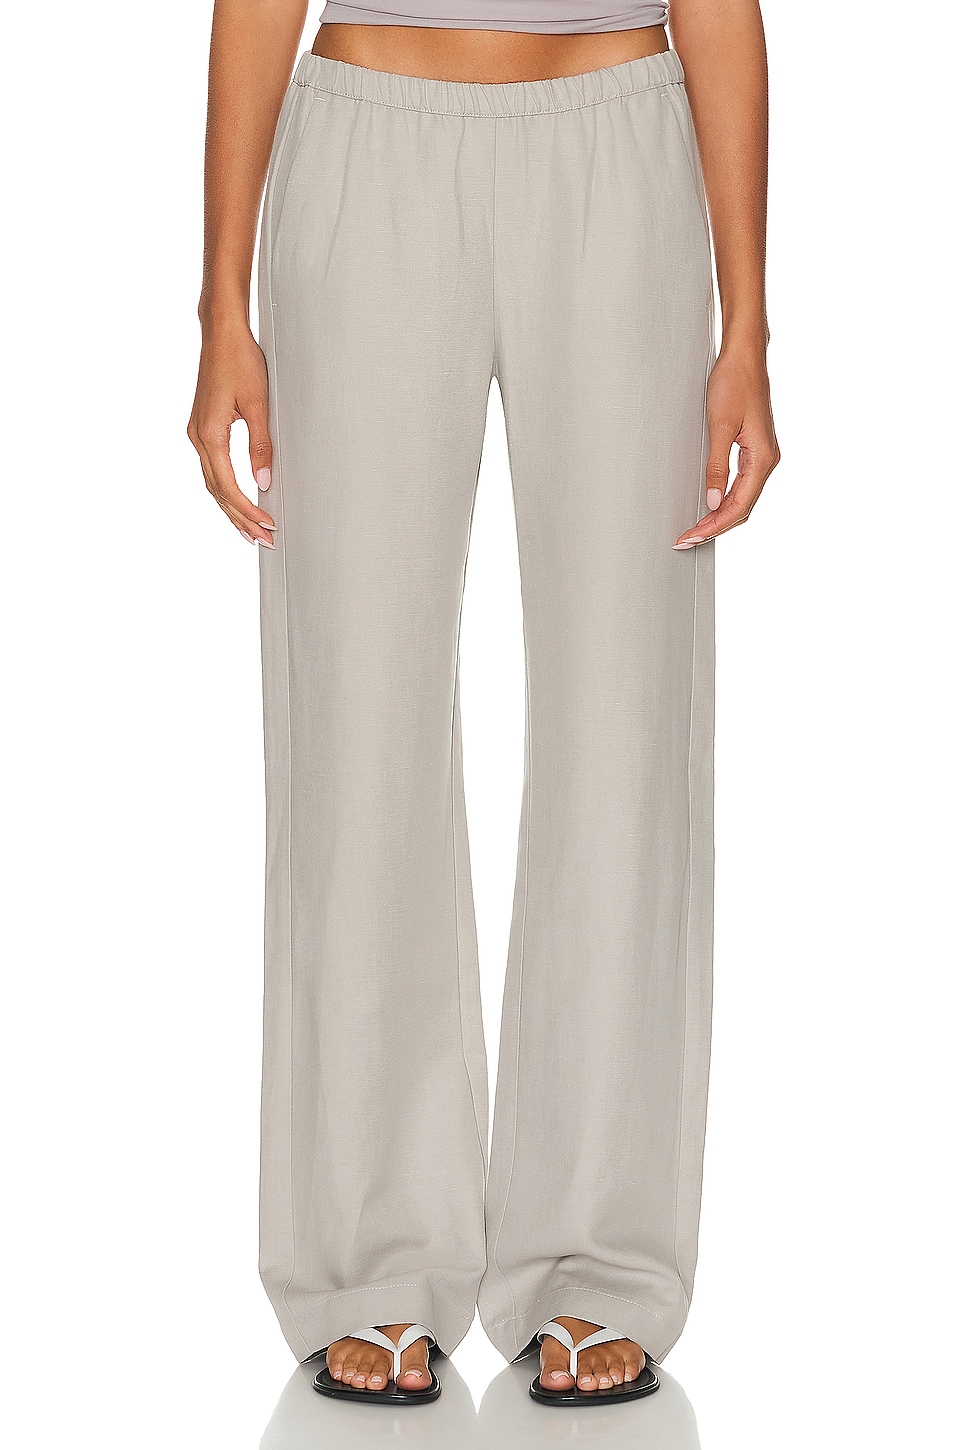 Twill Everywhere Pant Enza Costa $295 